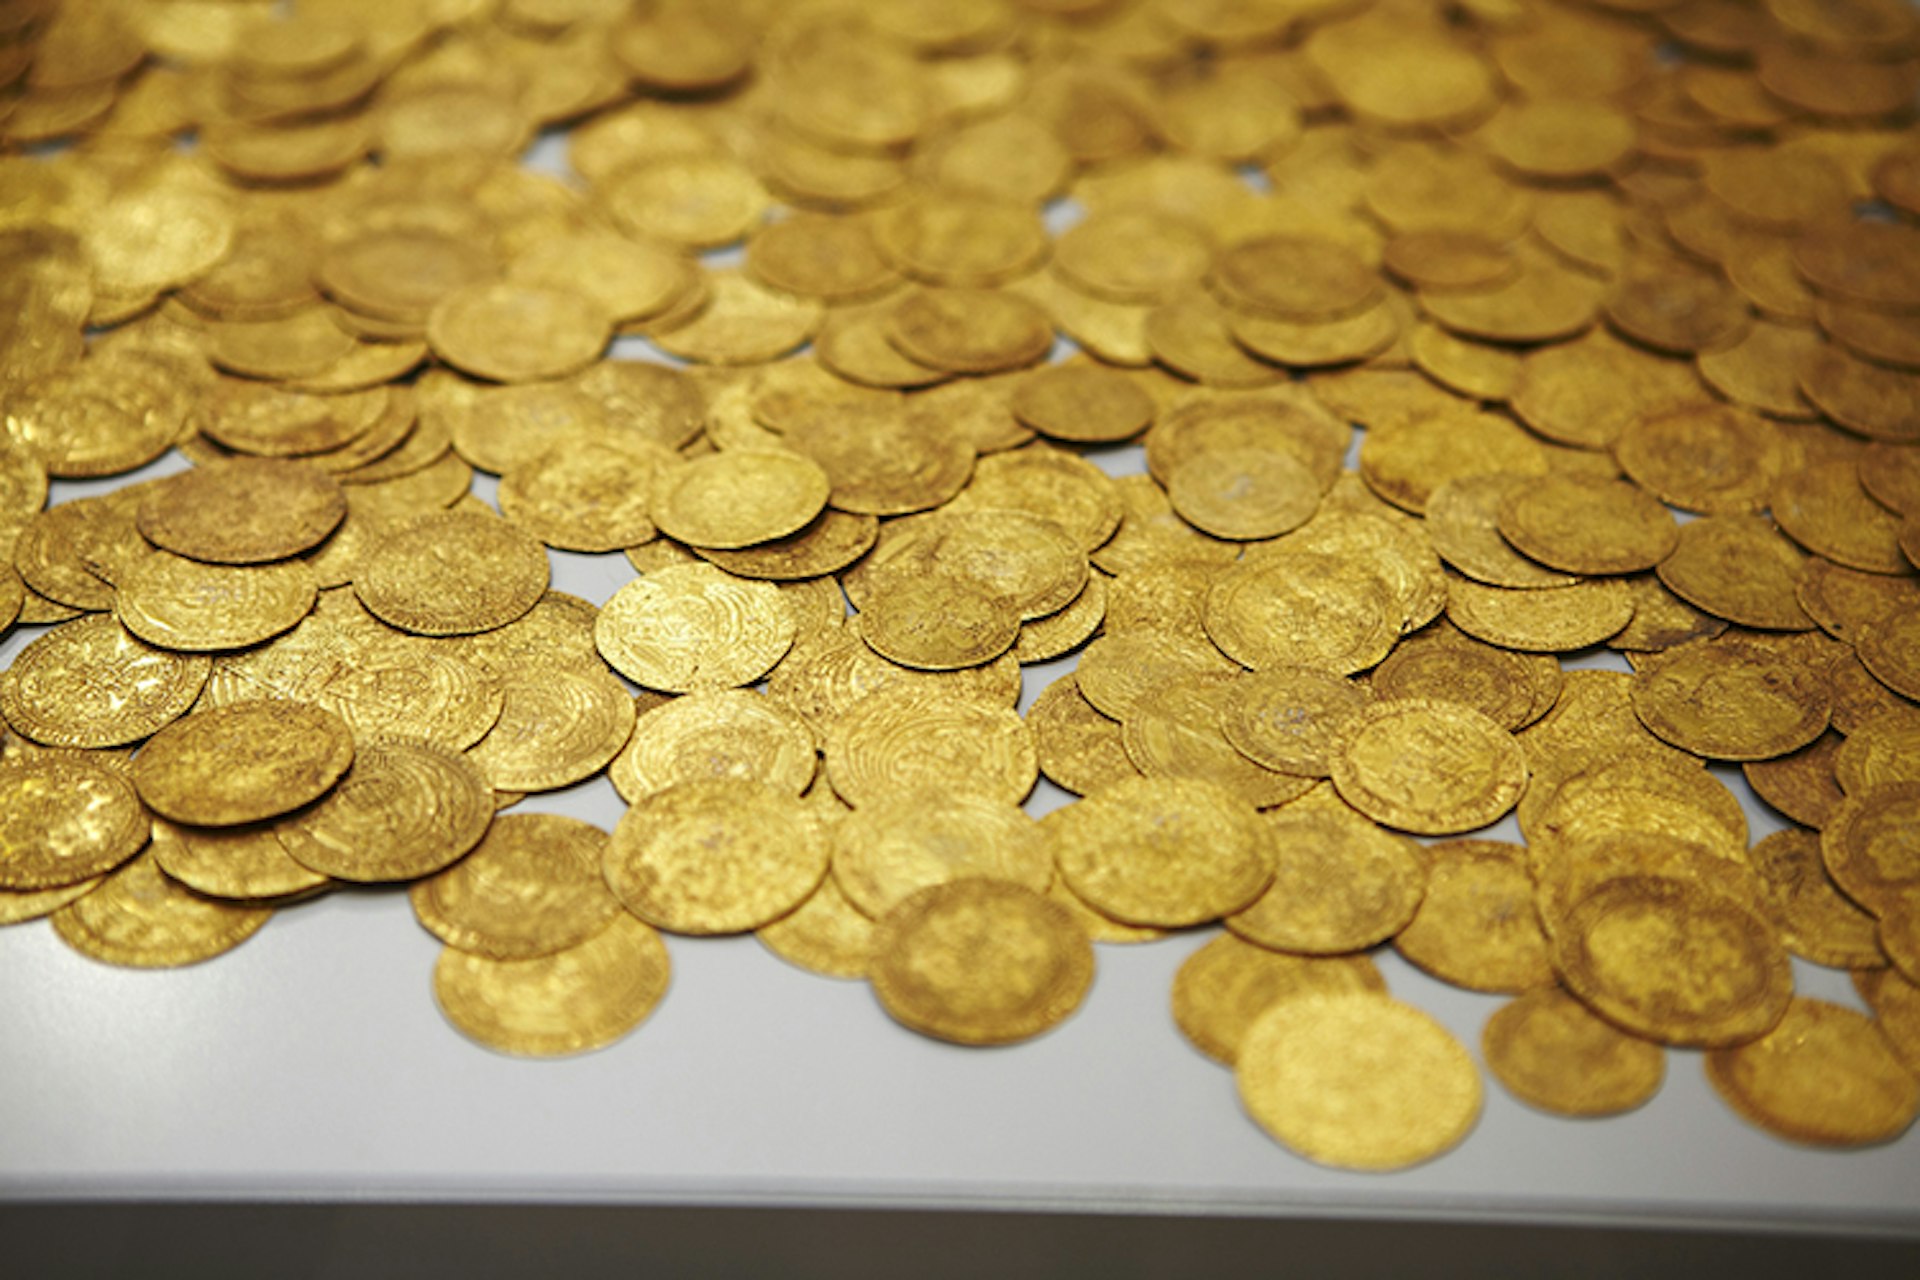 Fishpool Hoard, collection of medieval coins at British Museum.